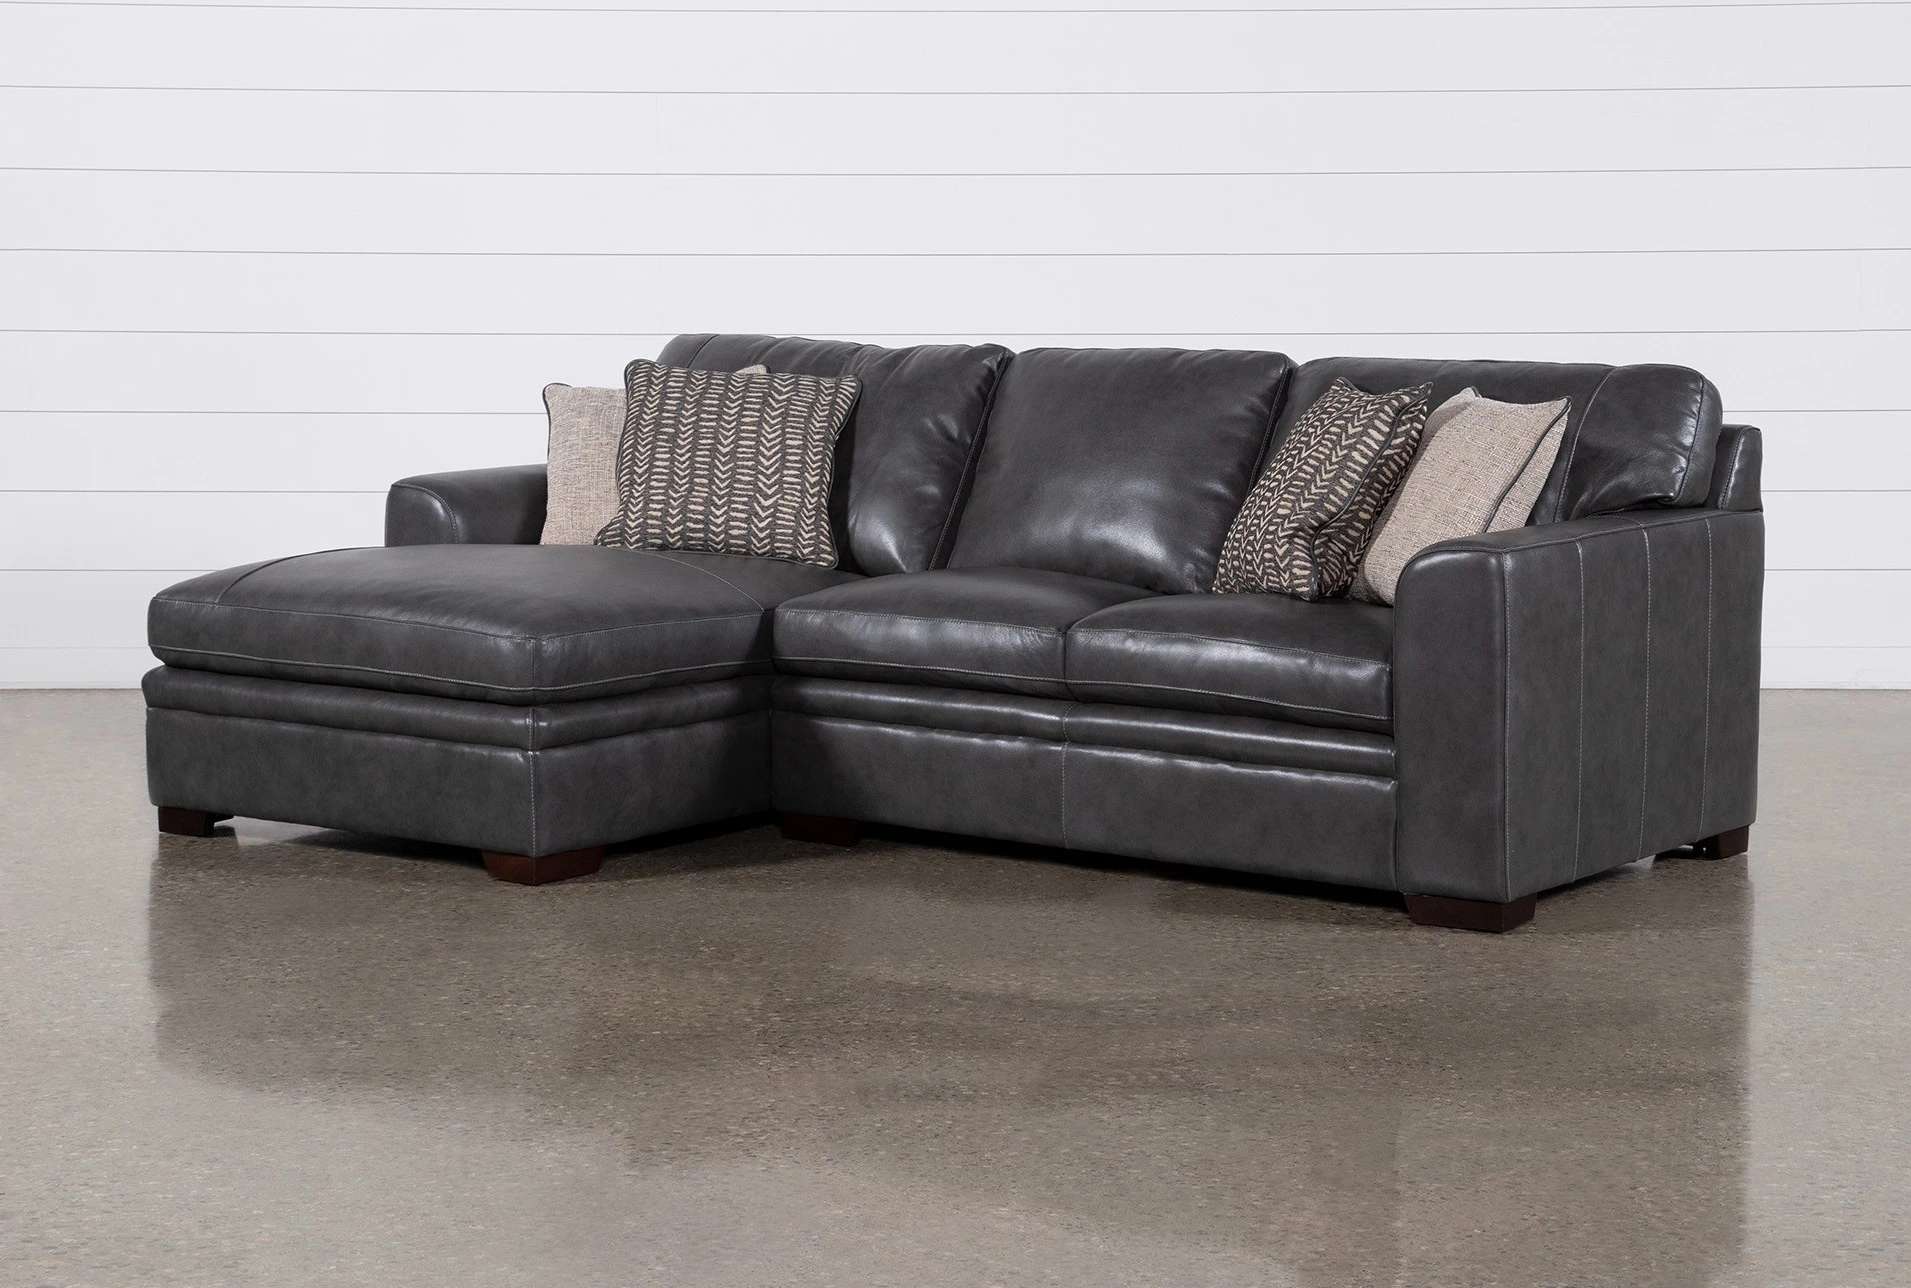 Two Leather Sofas Facing Each Other | lupon.gov.ph